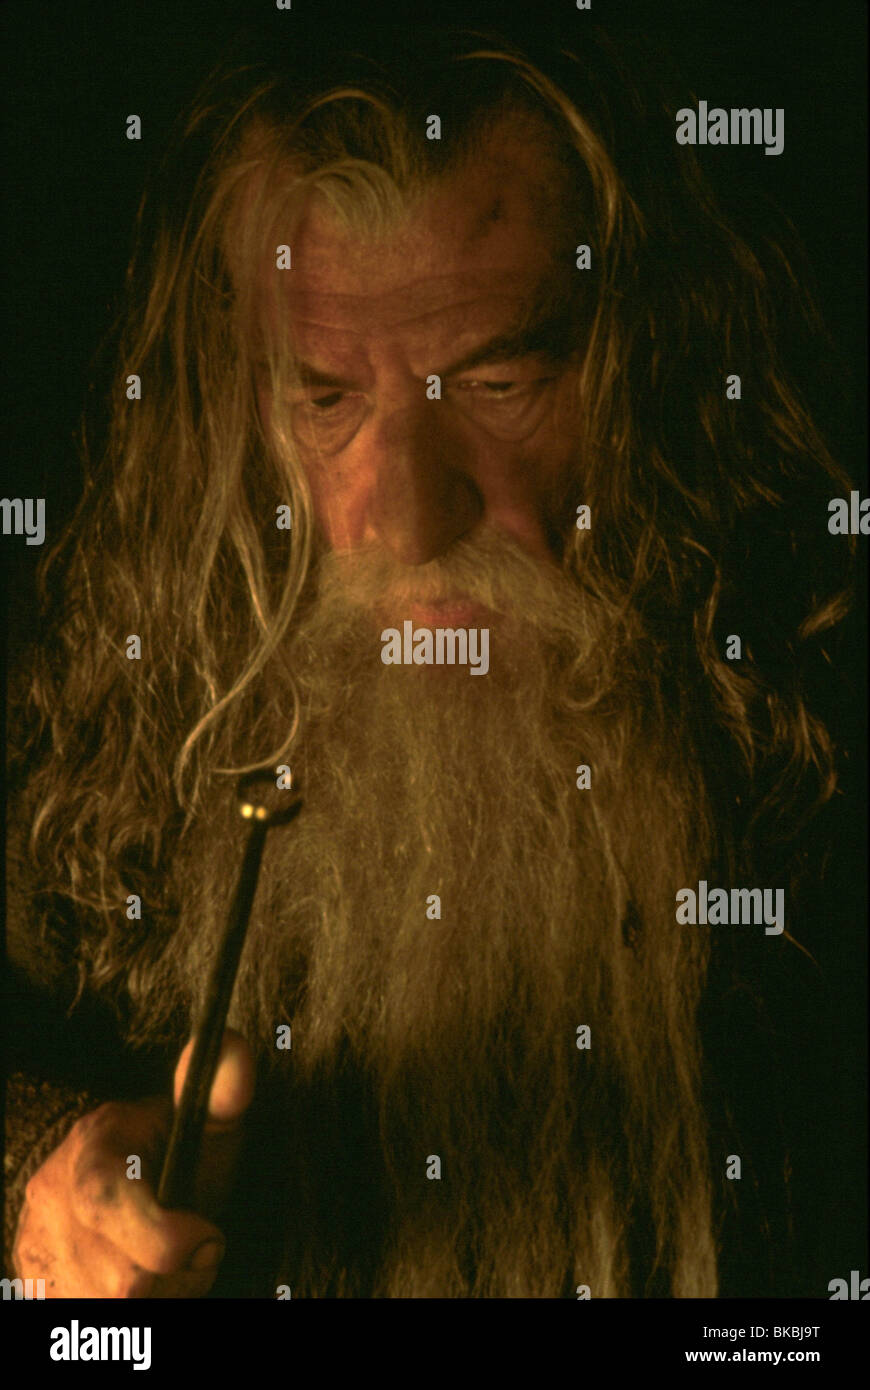 THE LORD OF THE RINGS: THE FELLOWSHIP OF THE RING (2001) IAN MCKELLEN, GANDALF FOTR 001-01 Stock Photo